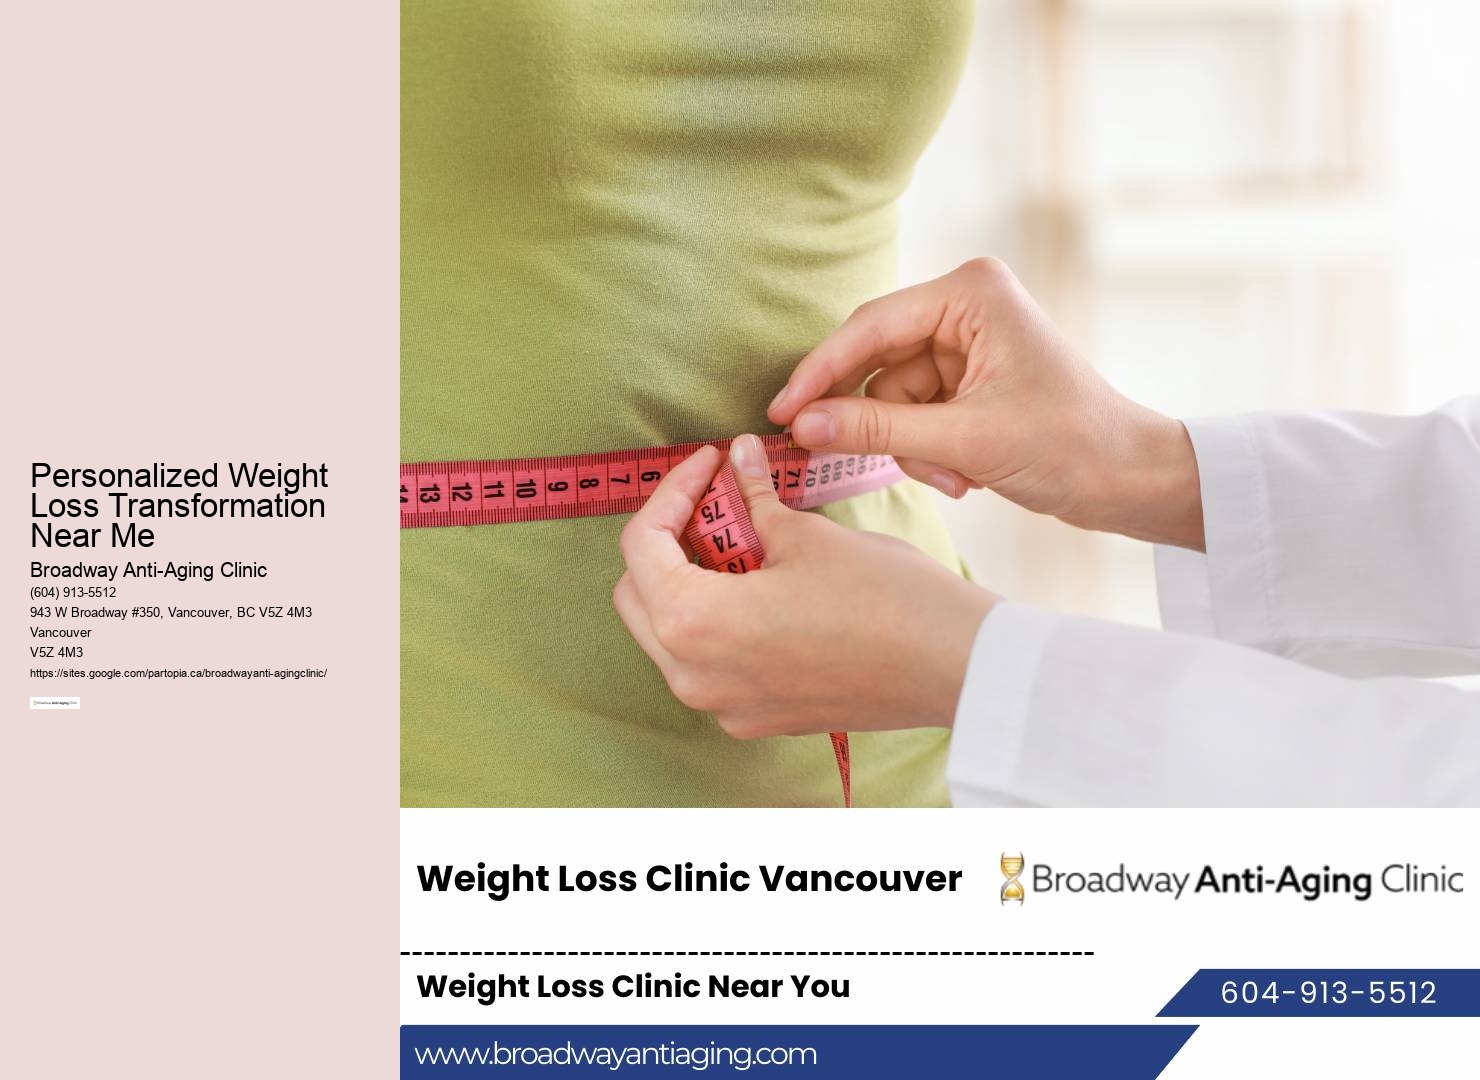 Vancouver Weight Loss Coaching Services